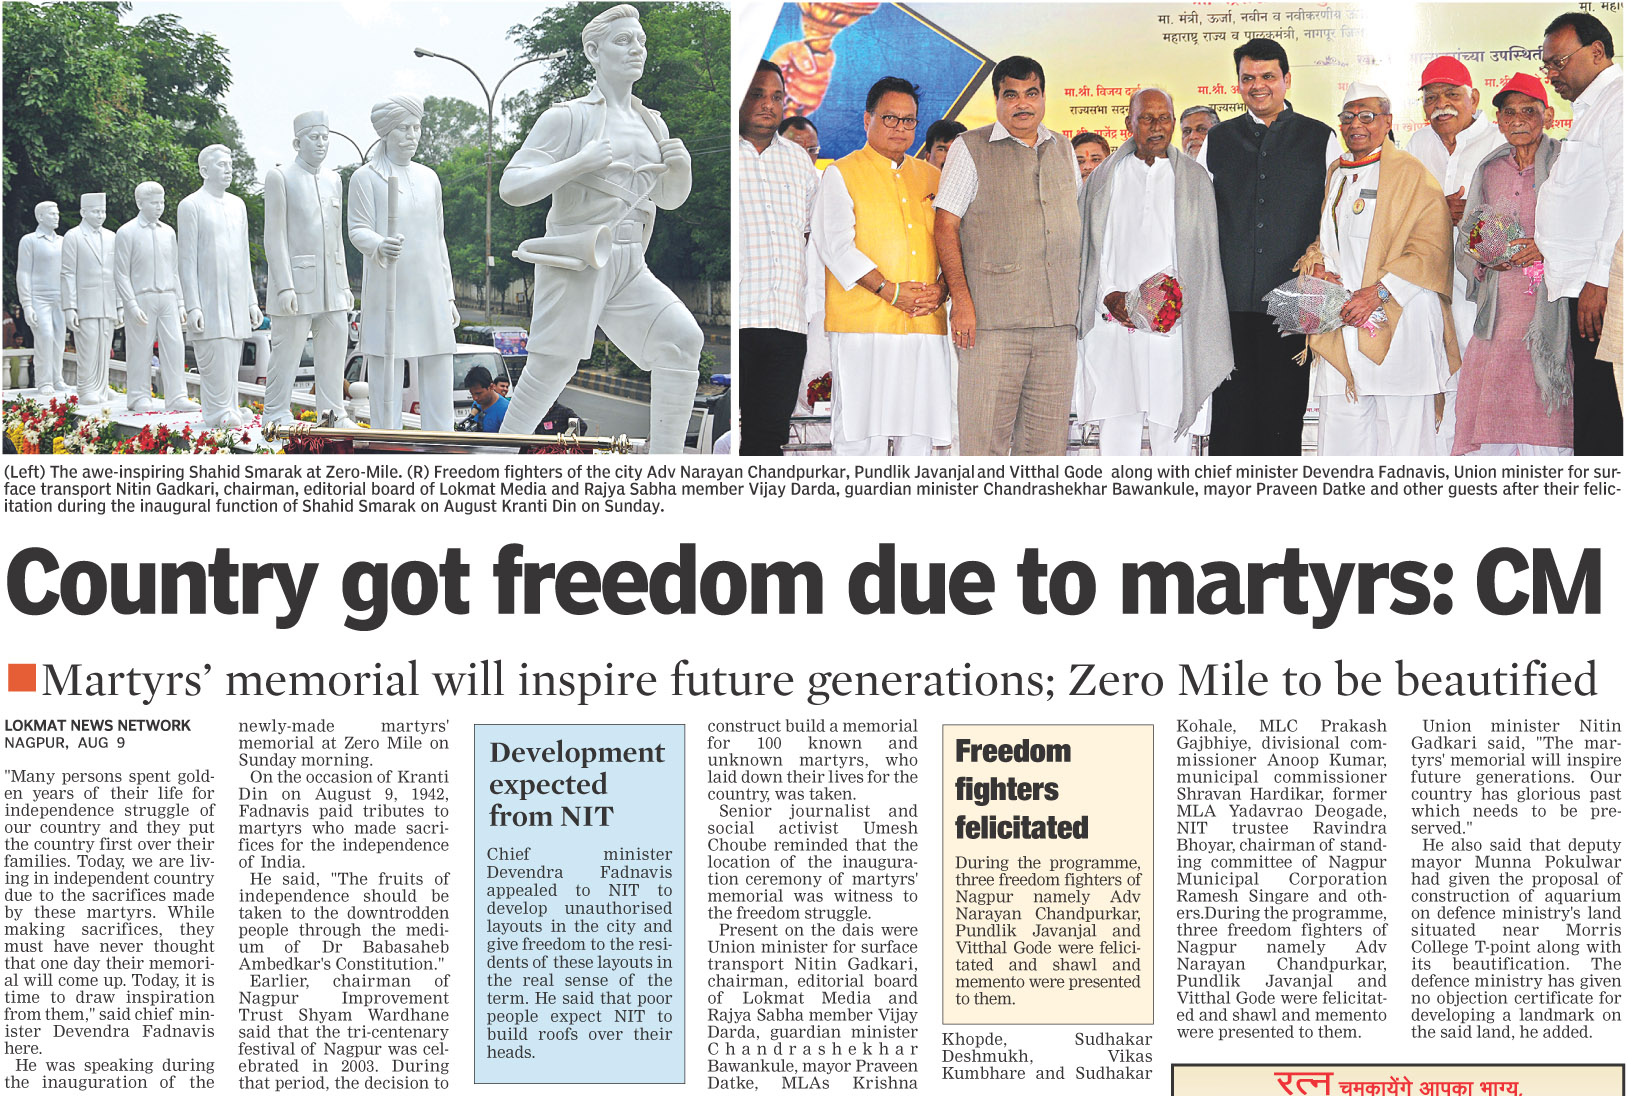 Country got freedom due to martyrs: CM